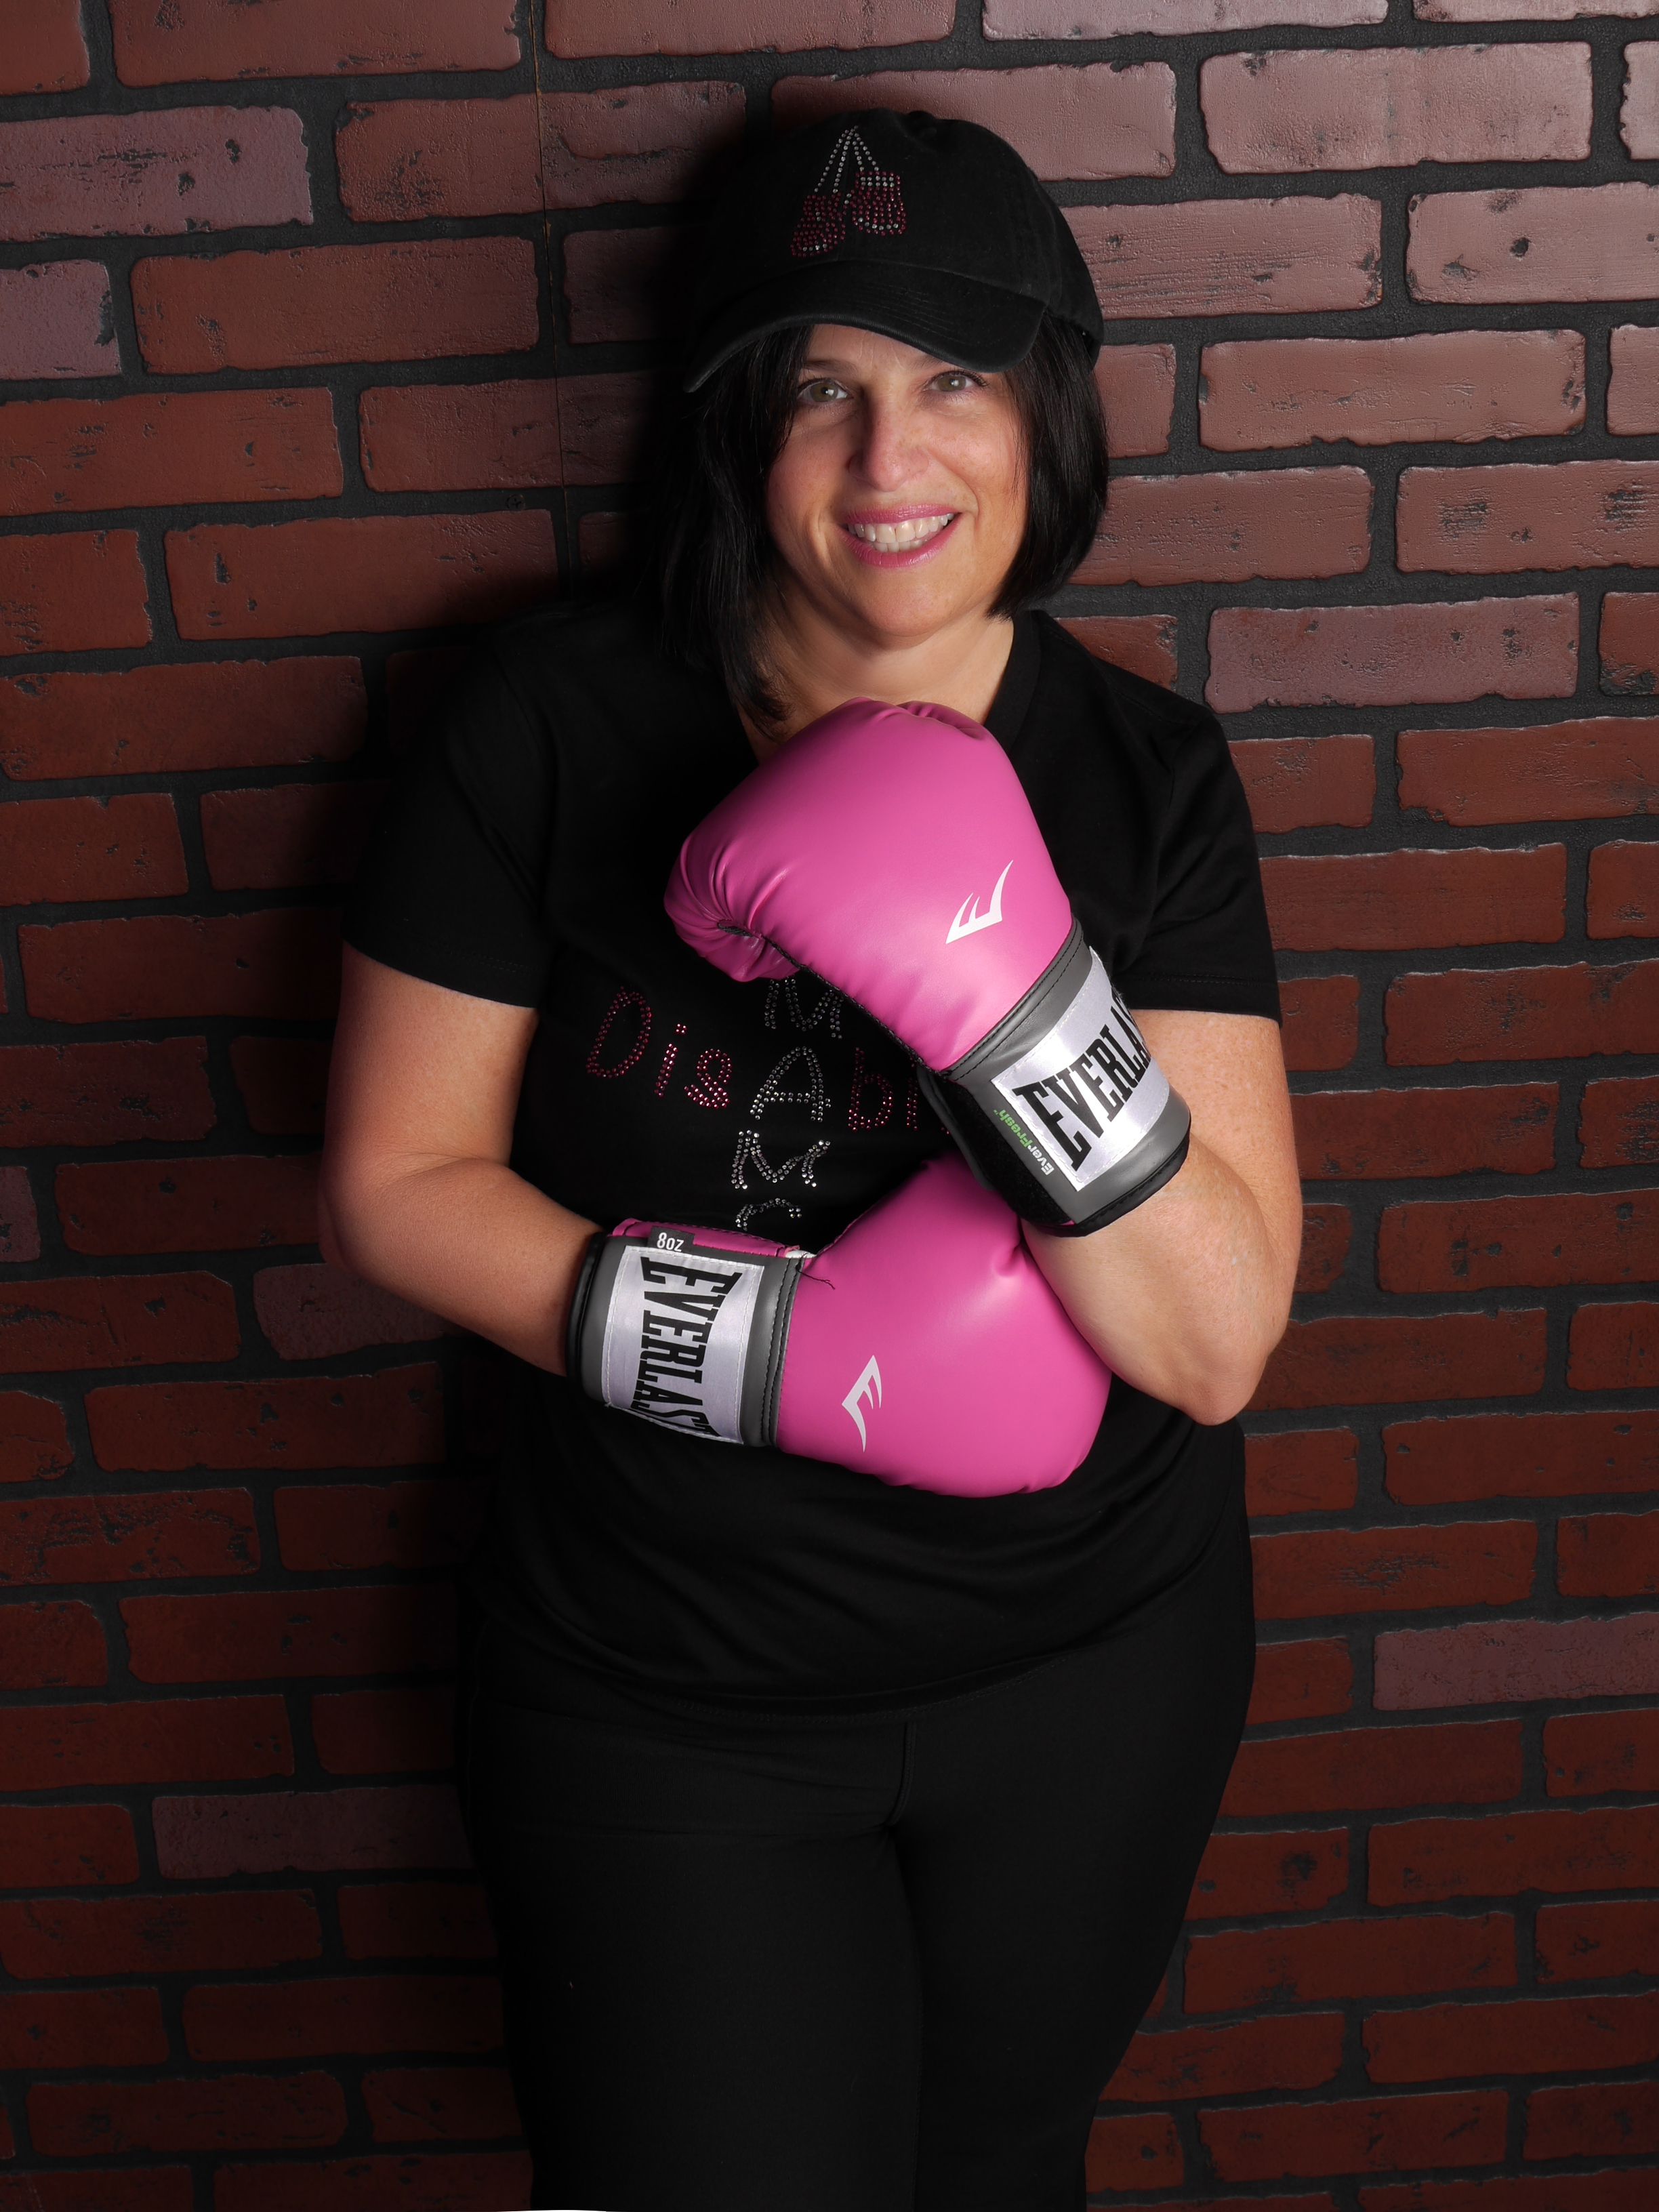 Nadine Vogel against brick wall wearing all black clothing and cap, and pink boxing gloves